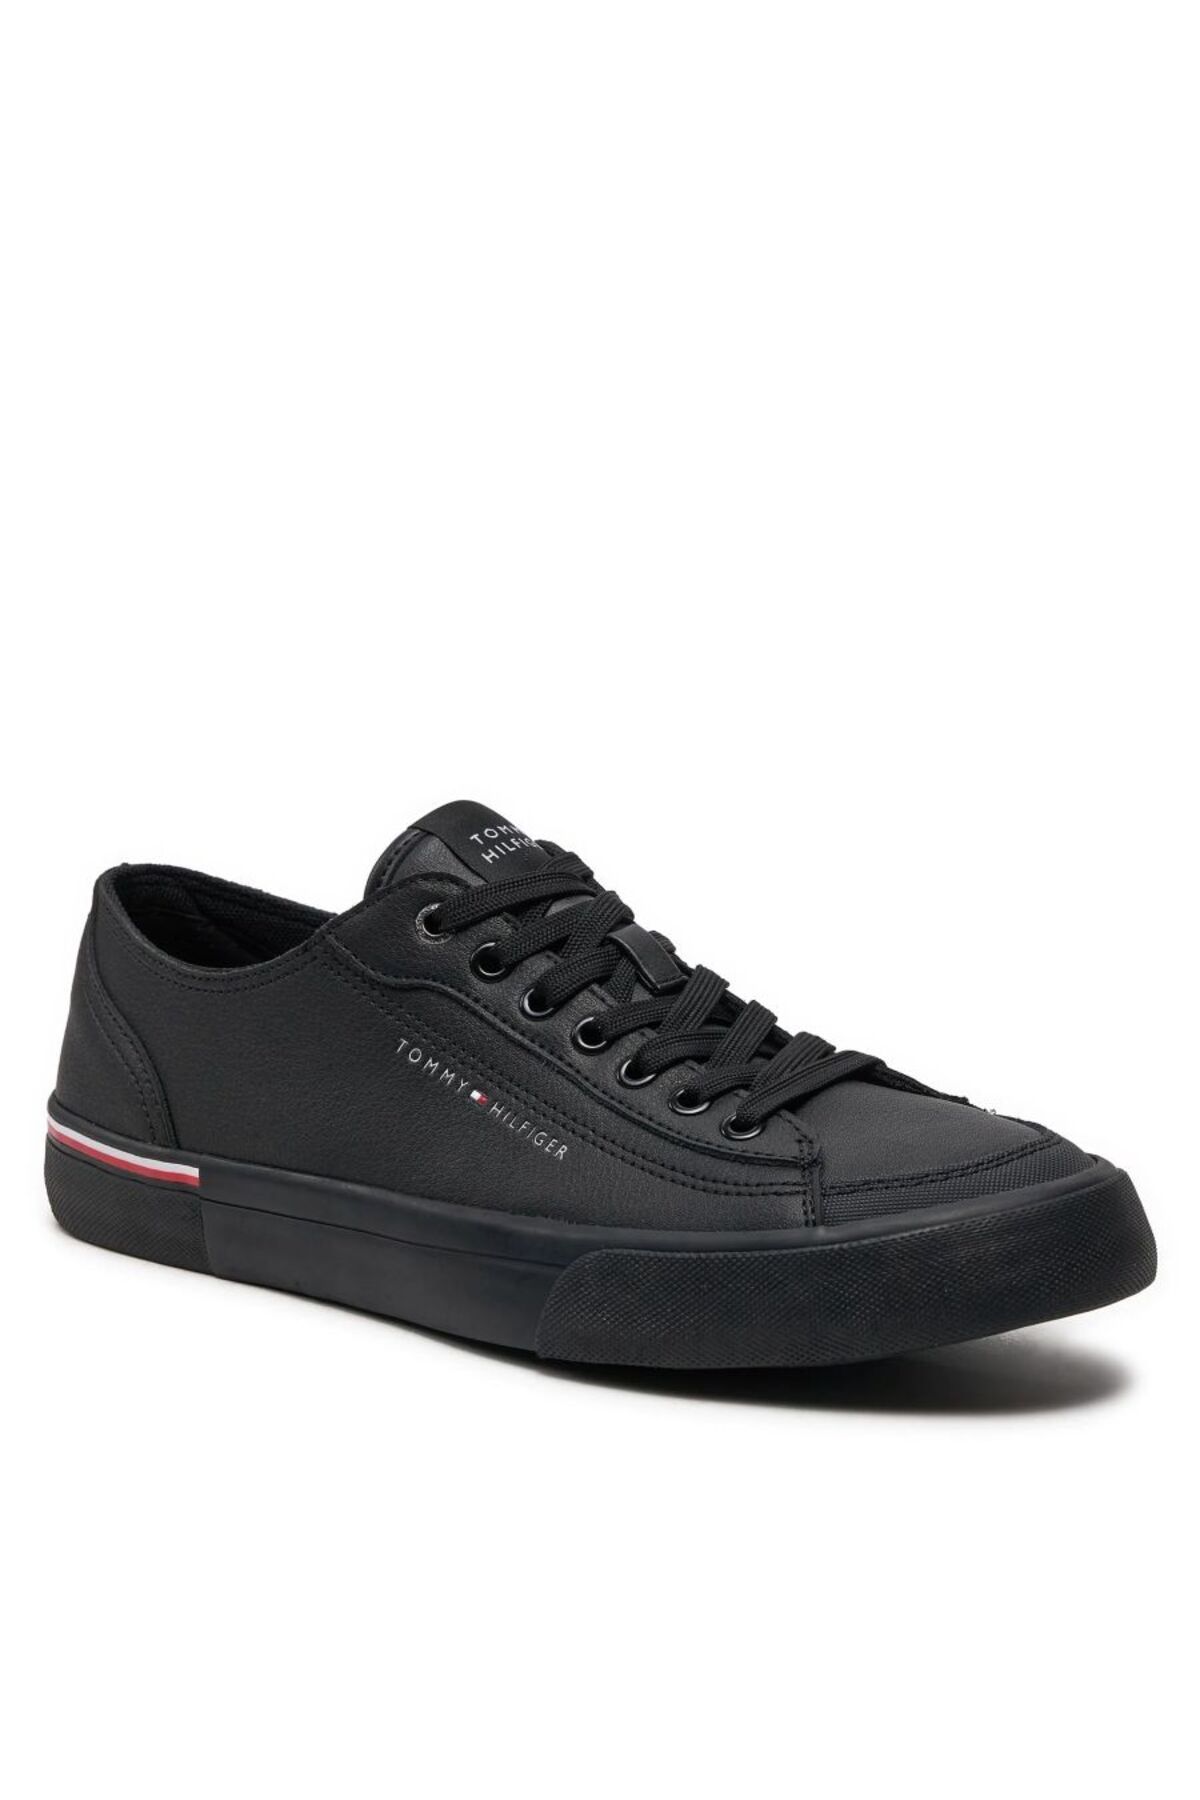 Tommy Hilfiger CORPORATE VULC LEATHER